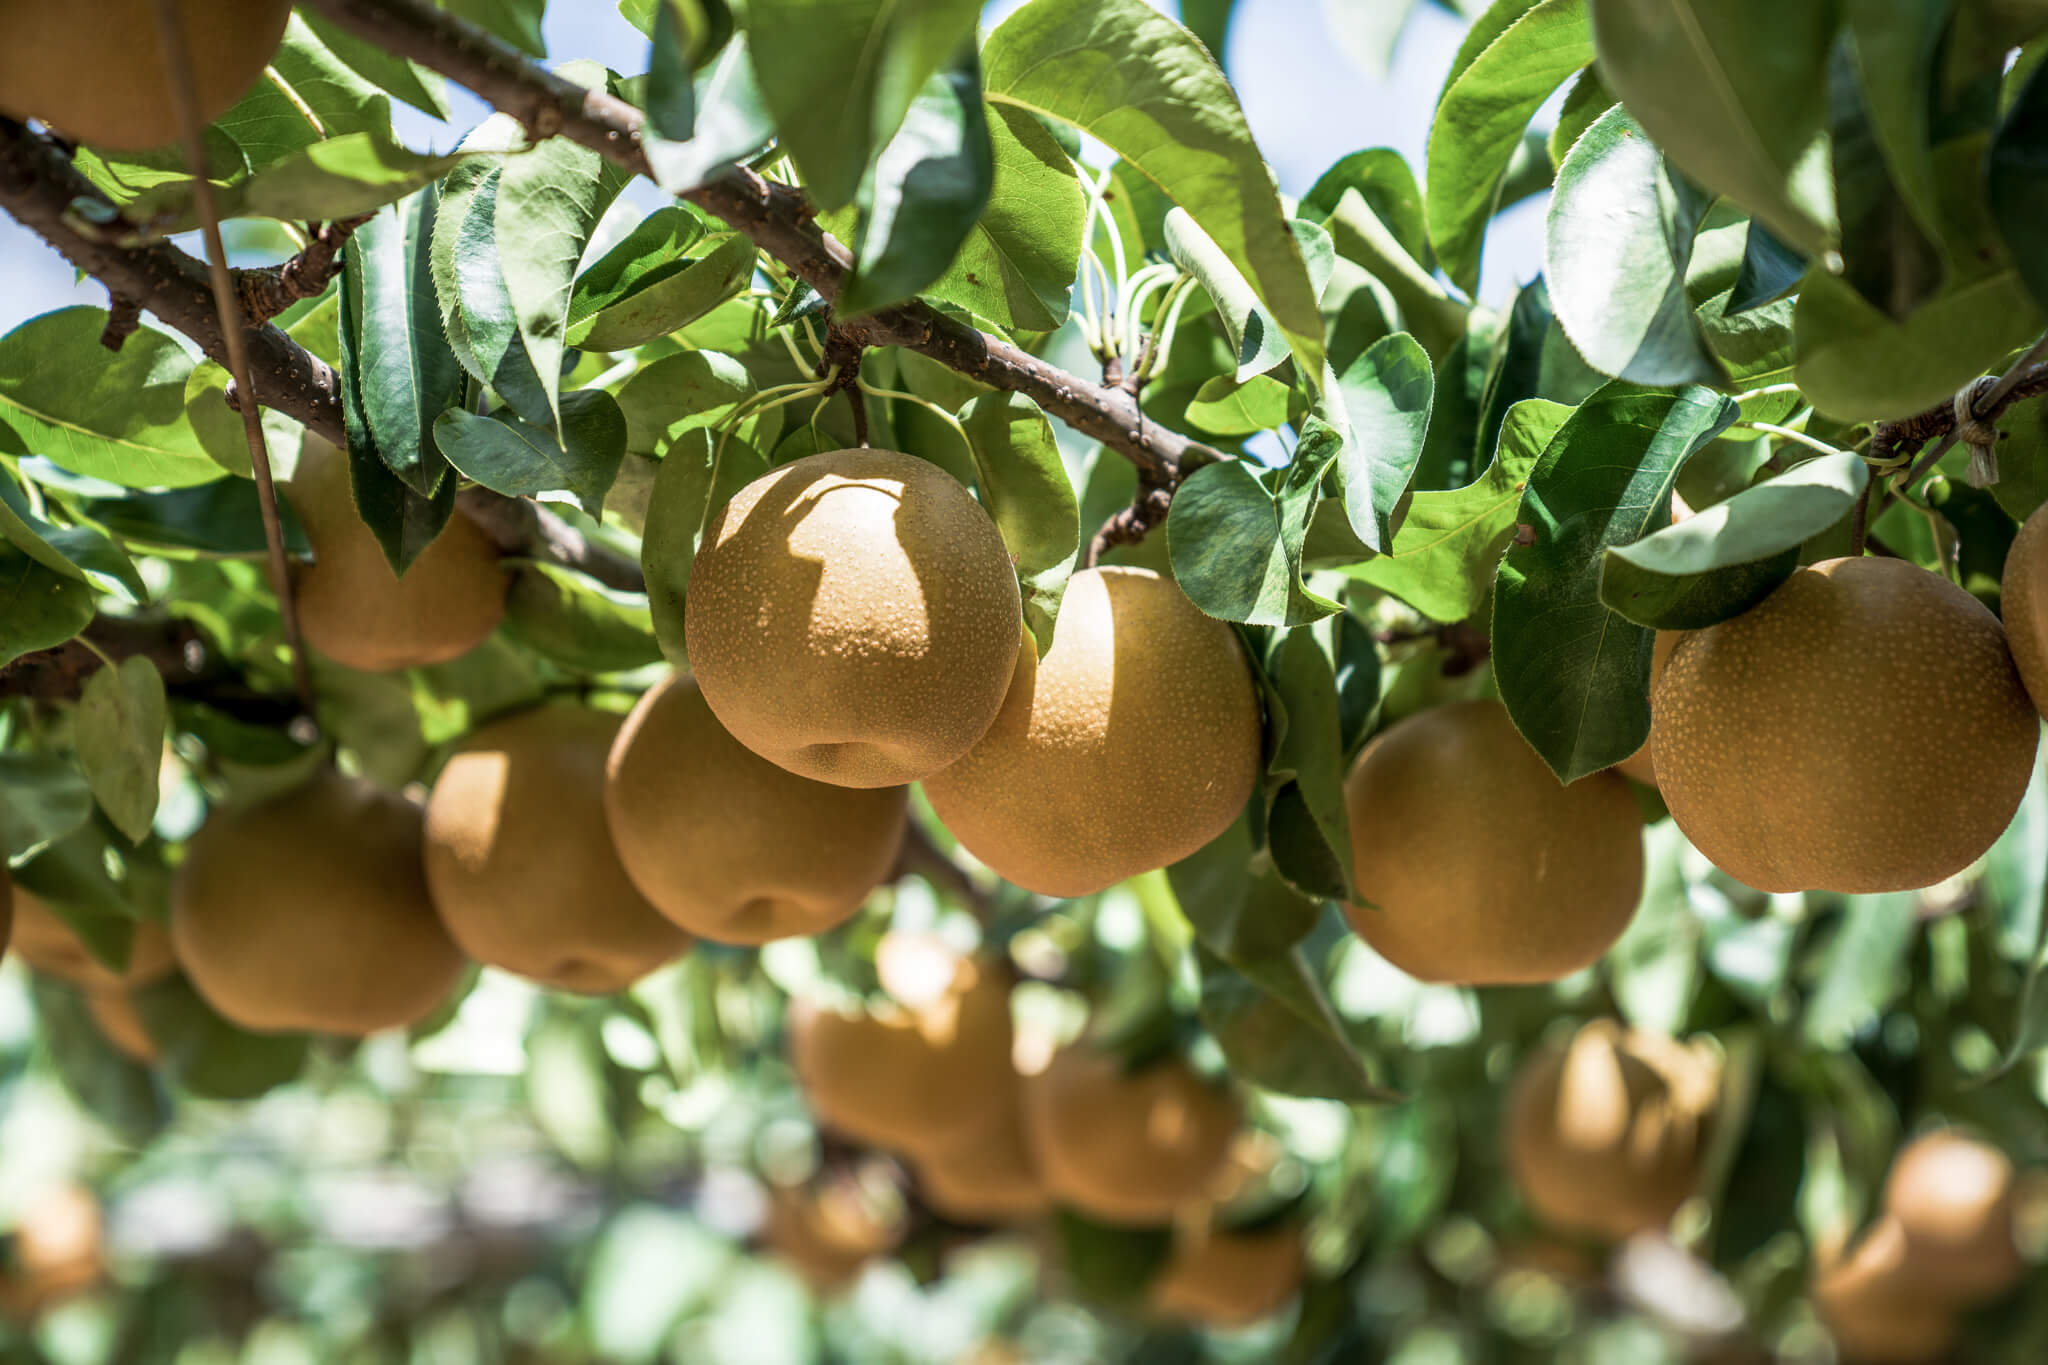 Nashi pear: The fruit with sweet-aromatic taste and 